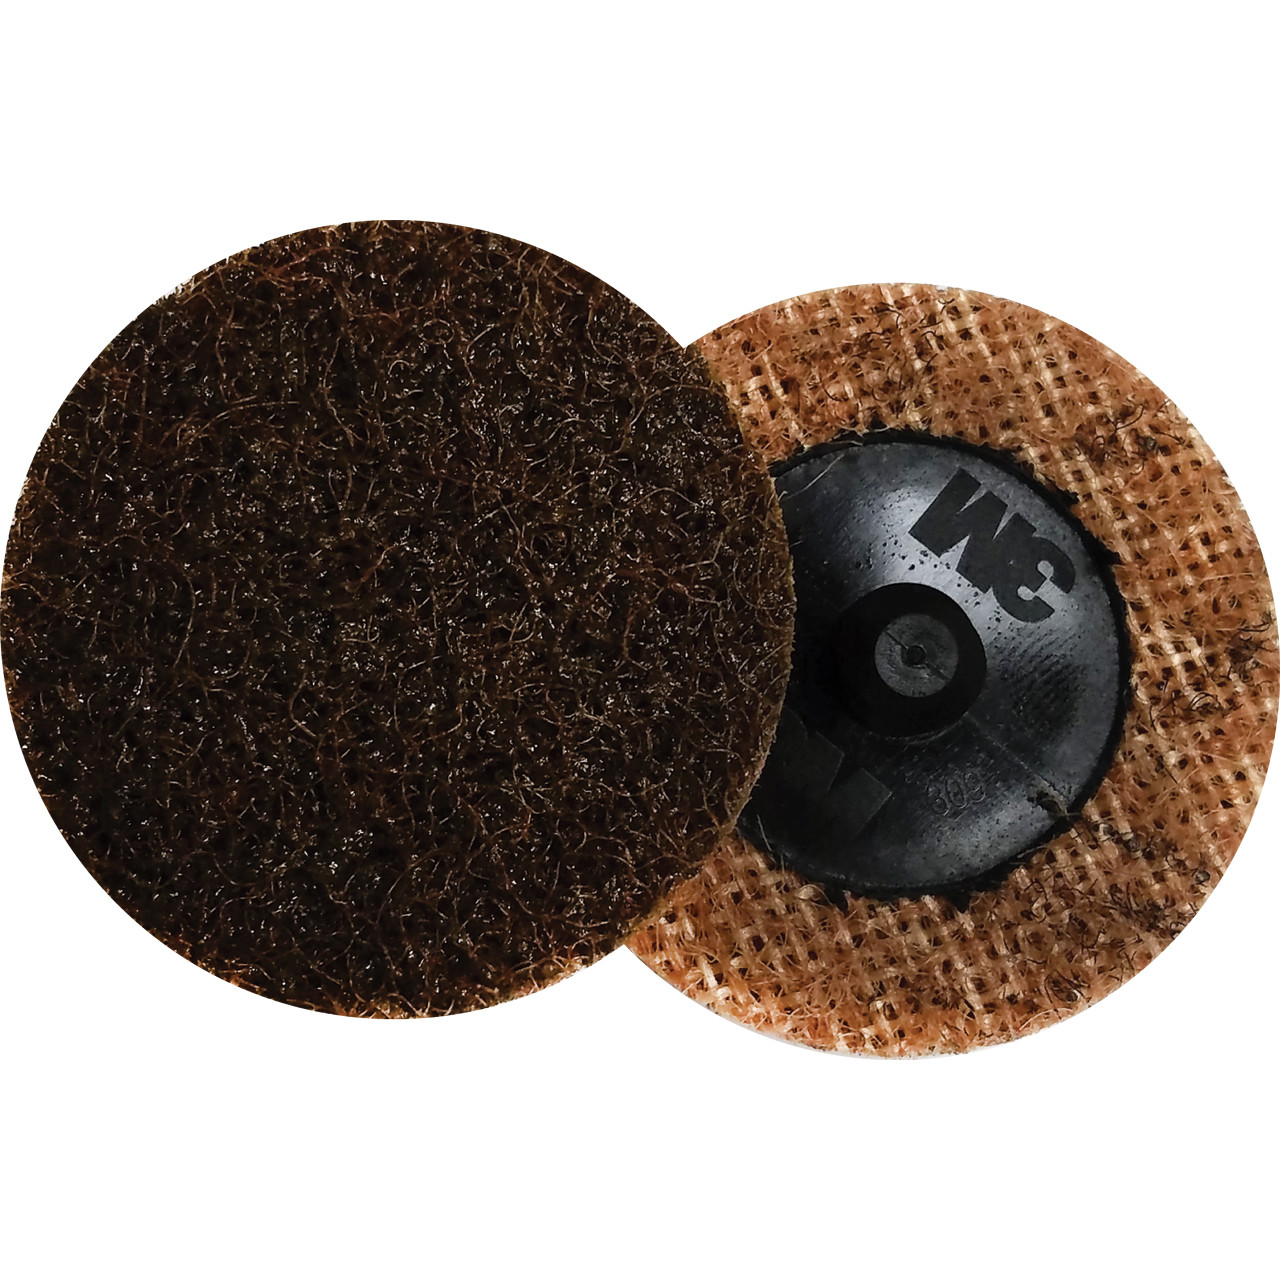 2 Roloc Type Surface Conditioning Scotch Brite Disc Pads